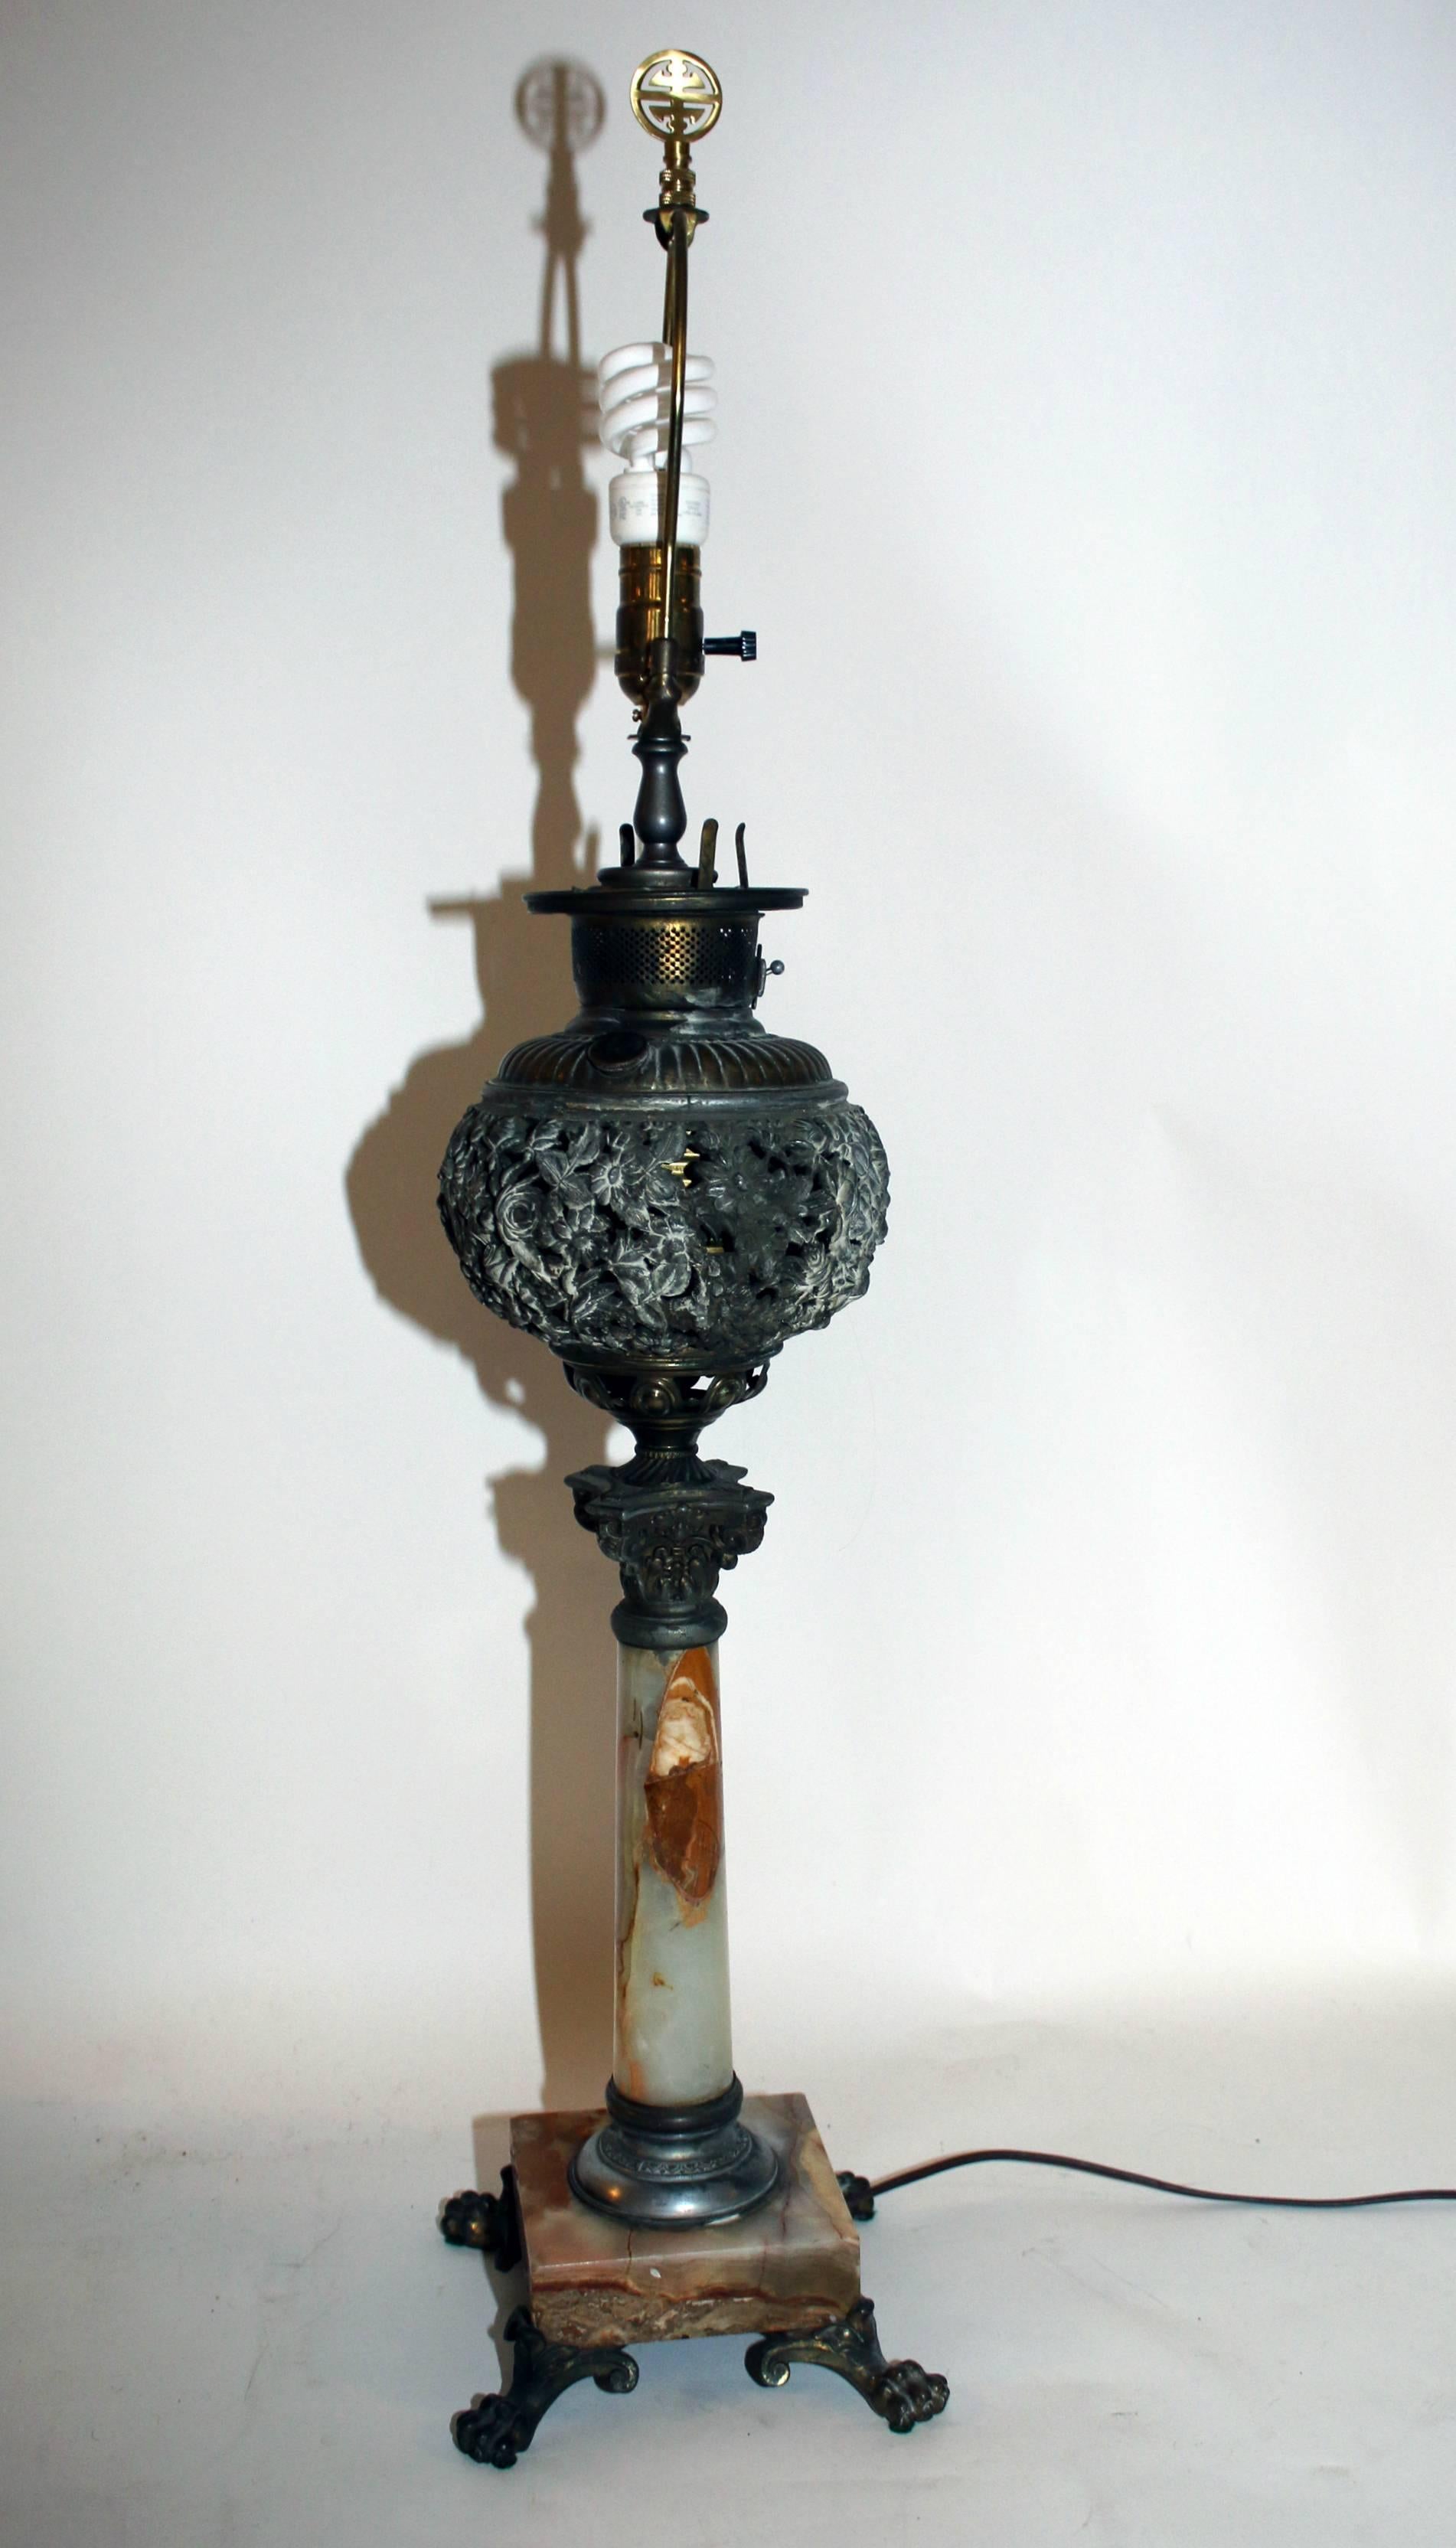 Antique oil burning lamp converted to electricity. Features include reticulated bronze ormolu in a floral pattern with an onyx marble Corinthian column and base. Beautiful veining in the marble.
Bronze paw feet. Silk shade.
The measurement below are